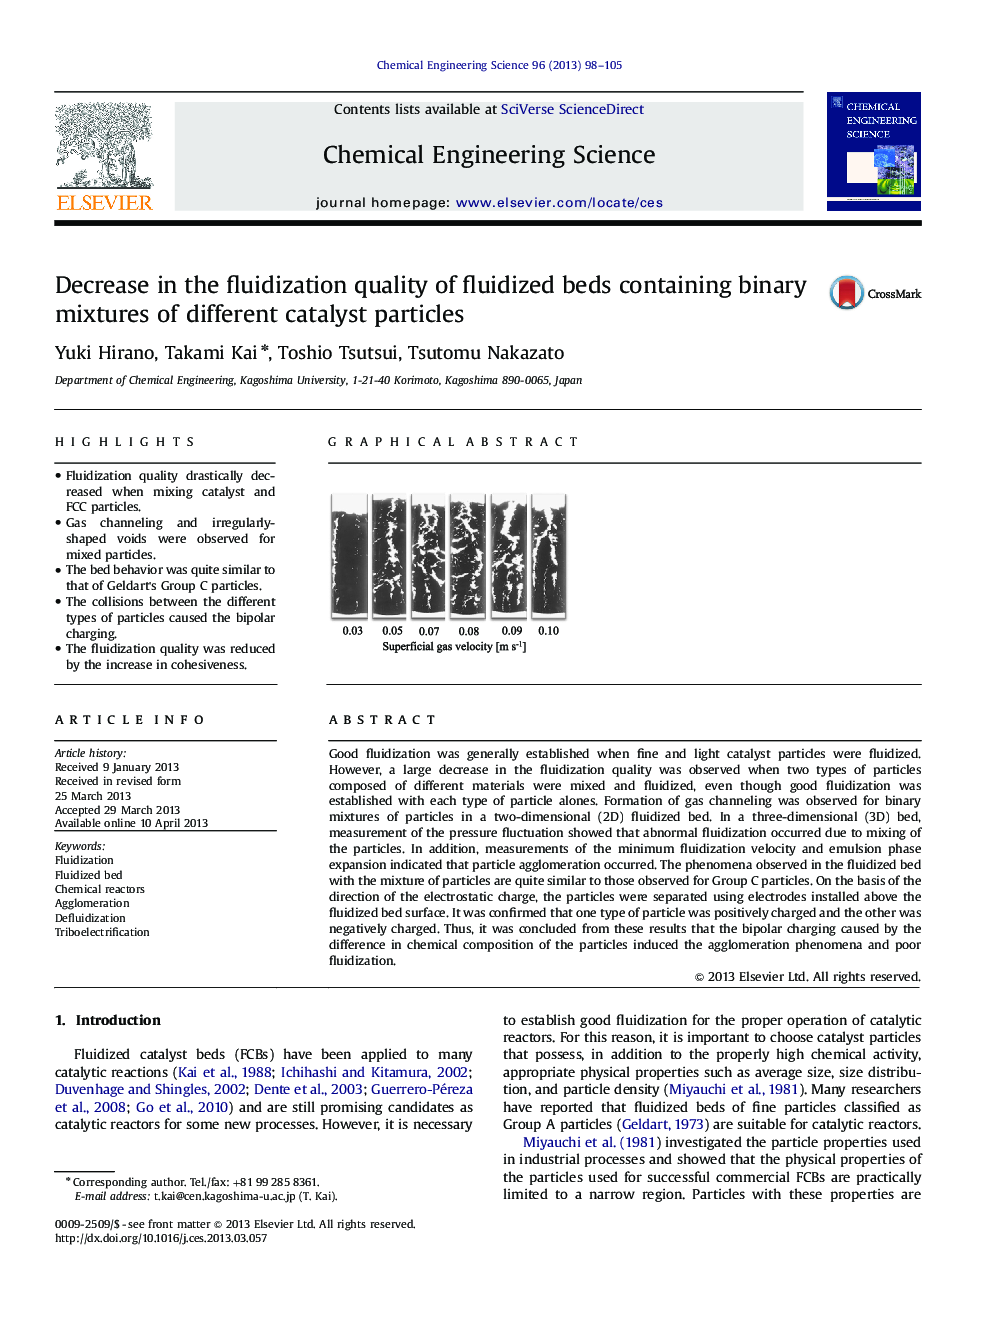 Decrease in the fluidization quality of fluidized beds containing binary mixtures of different catalyst particles